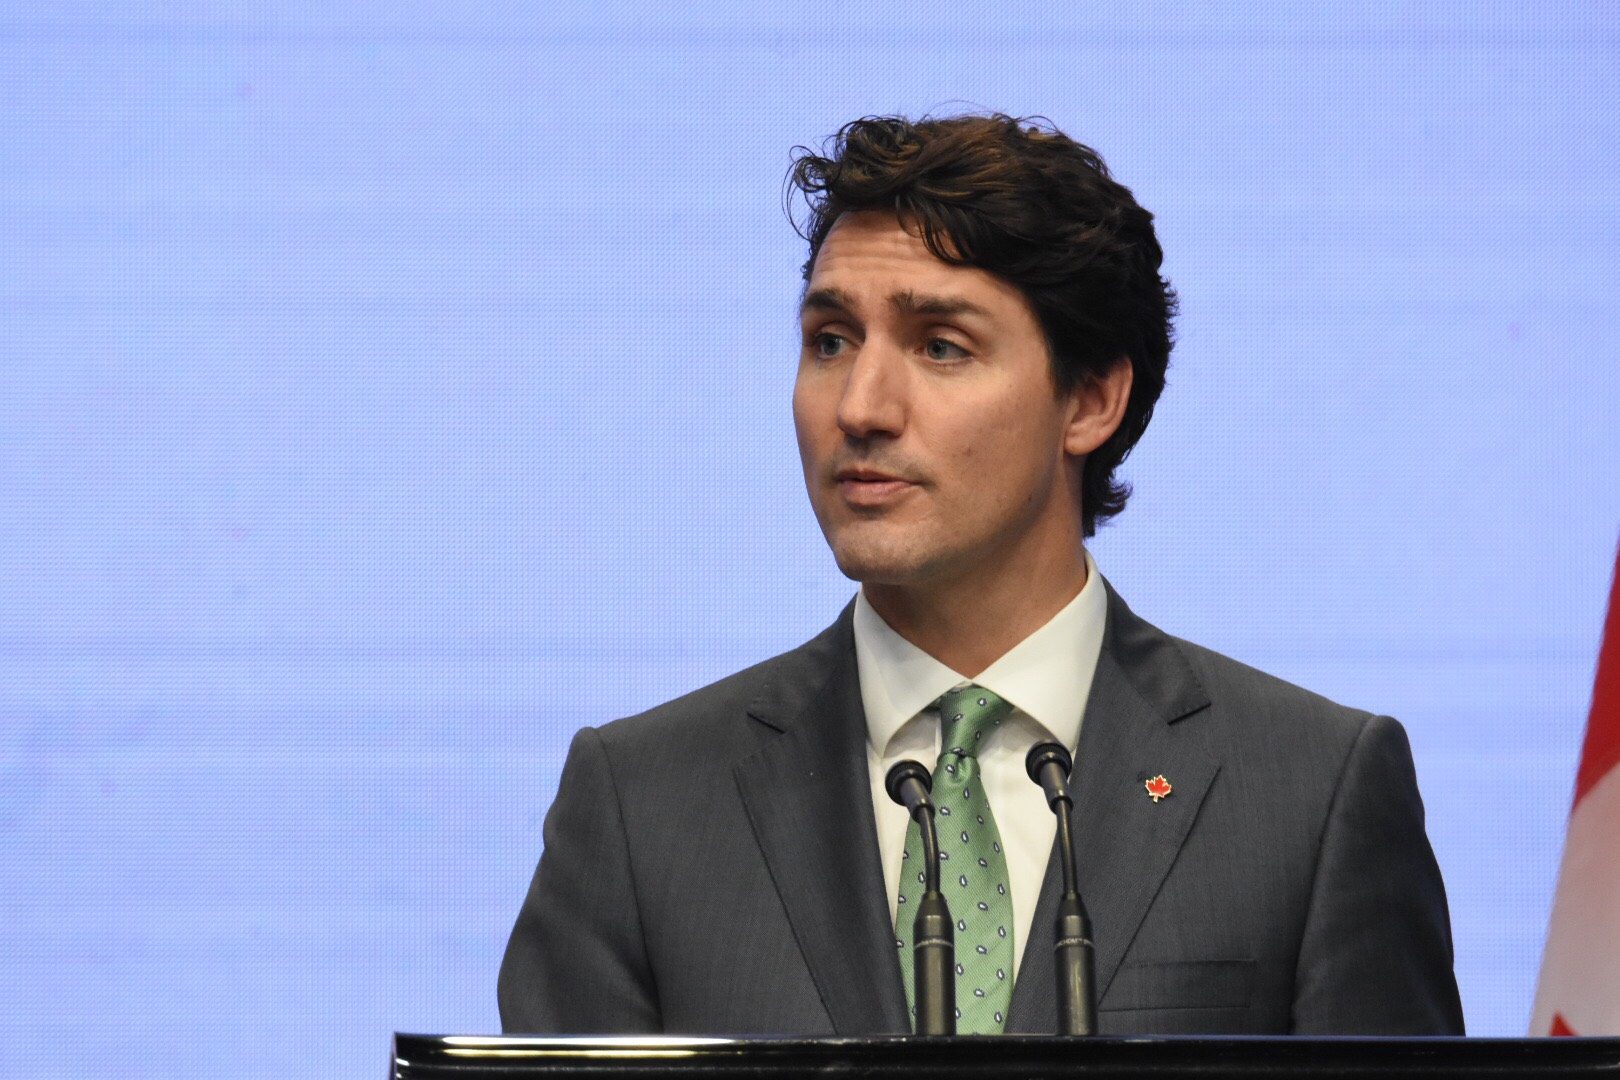 Trudeau announces landmark investments in women’s sexual health rights